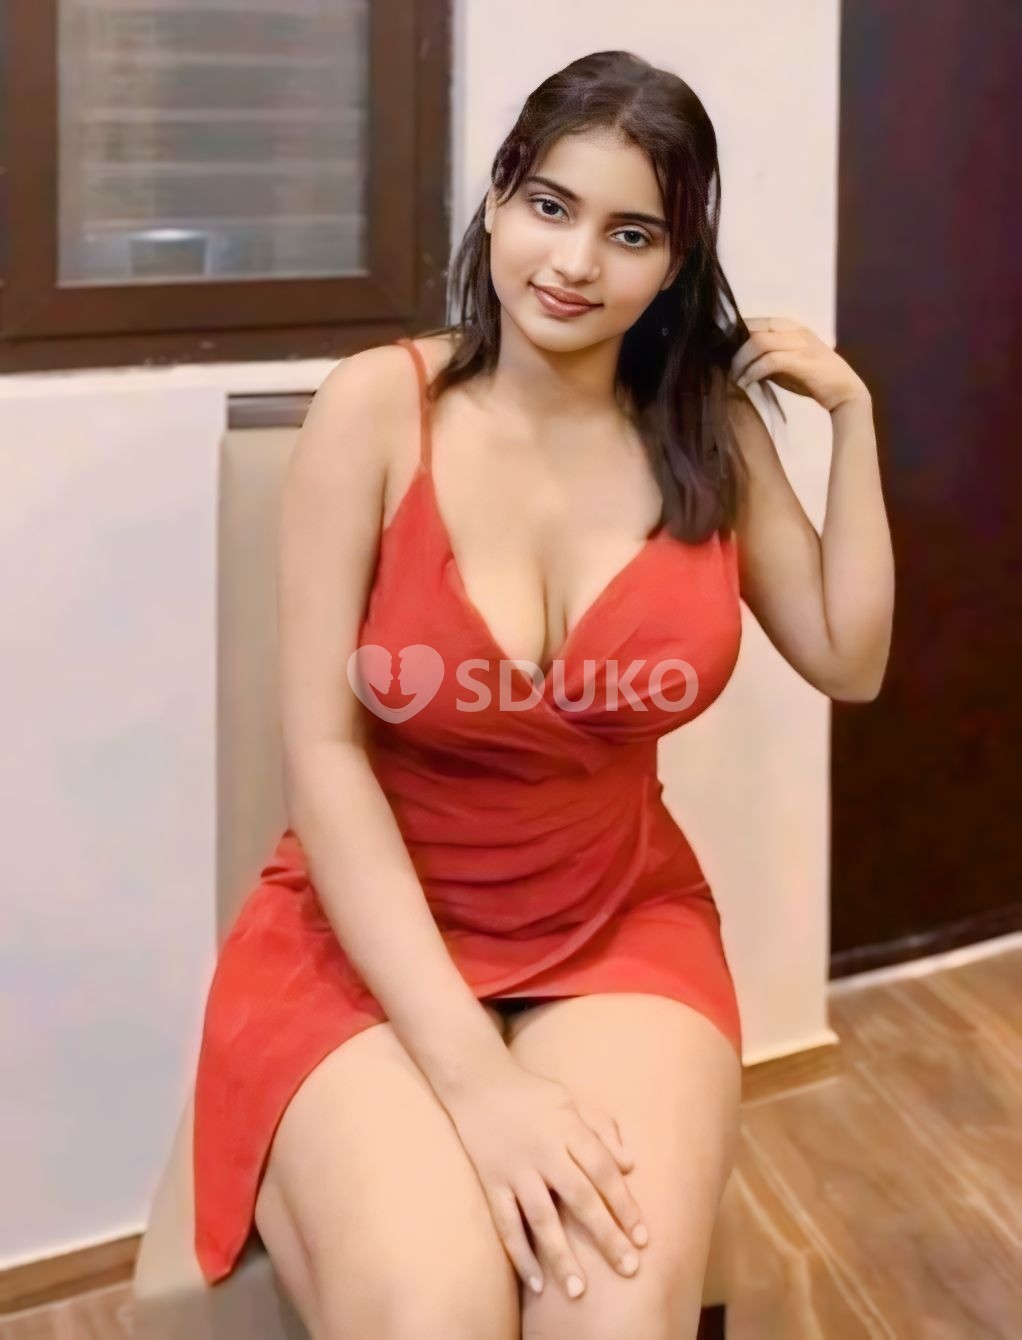 NAGERCOIL BEST-PRICE VIP ❣️ GIRLS 💯% SAFE  ESCORT CALL GIRL SERVICE 24X7 AVAILABLE